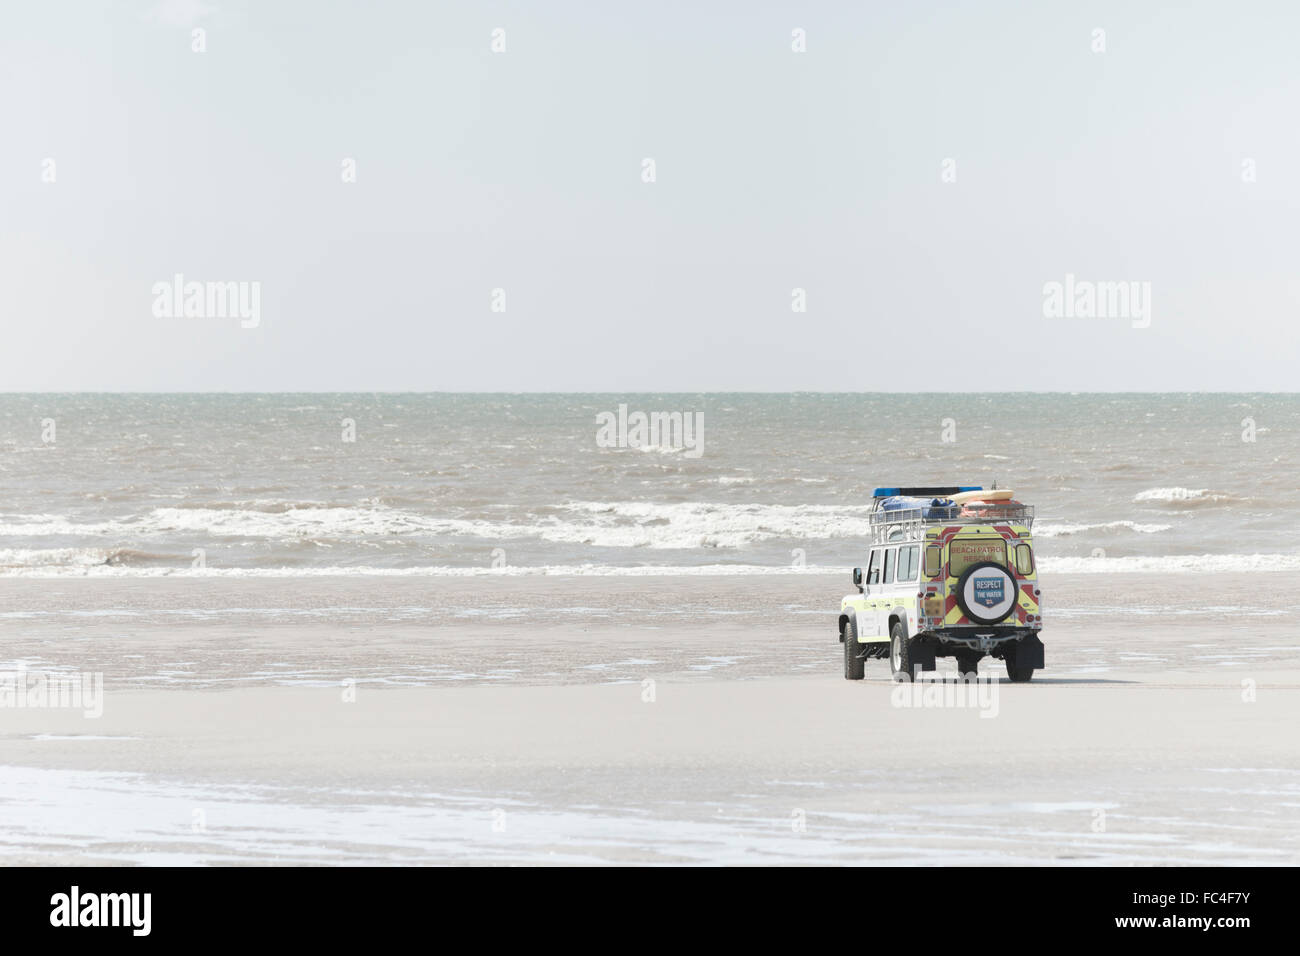 Sea rescue vehicle watching over the encroaching tides on the North West, English coastline, by Blackpool Stock Photo